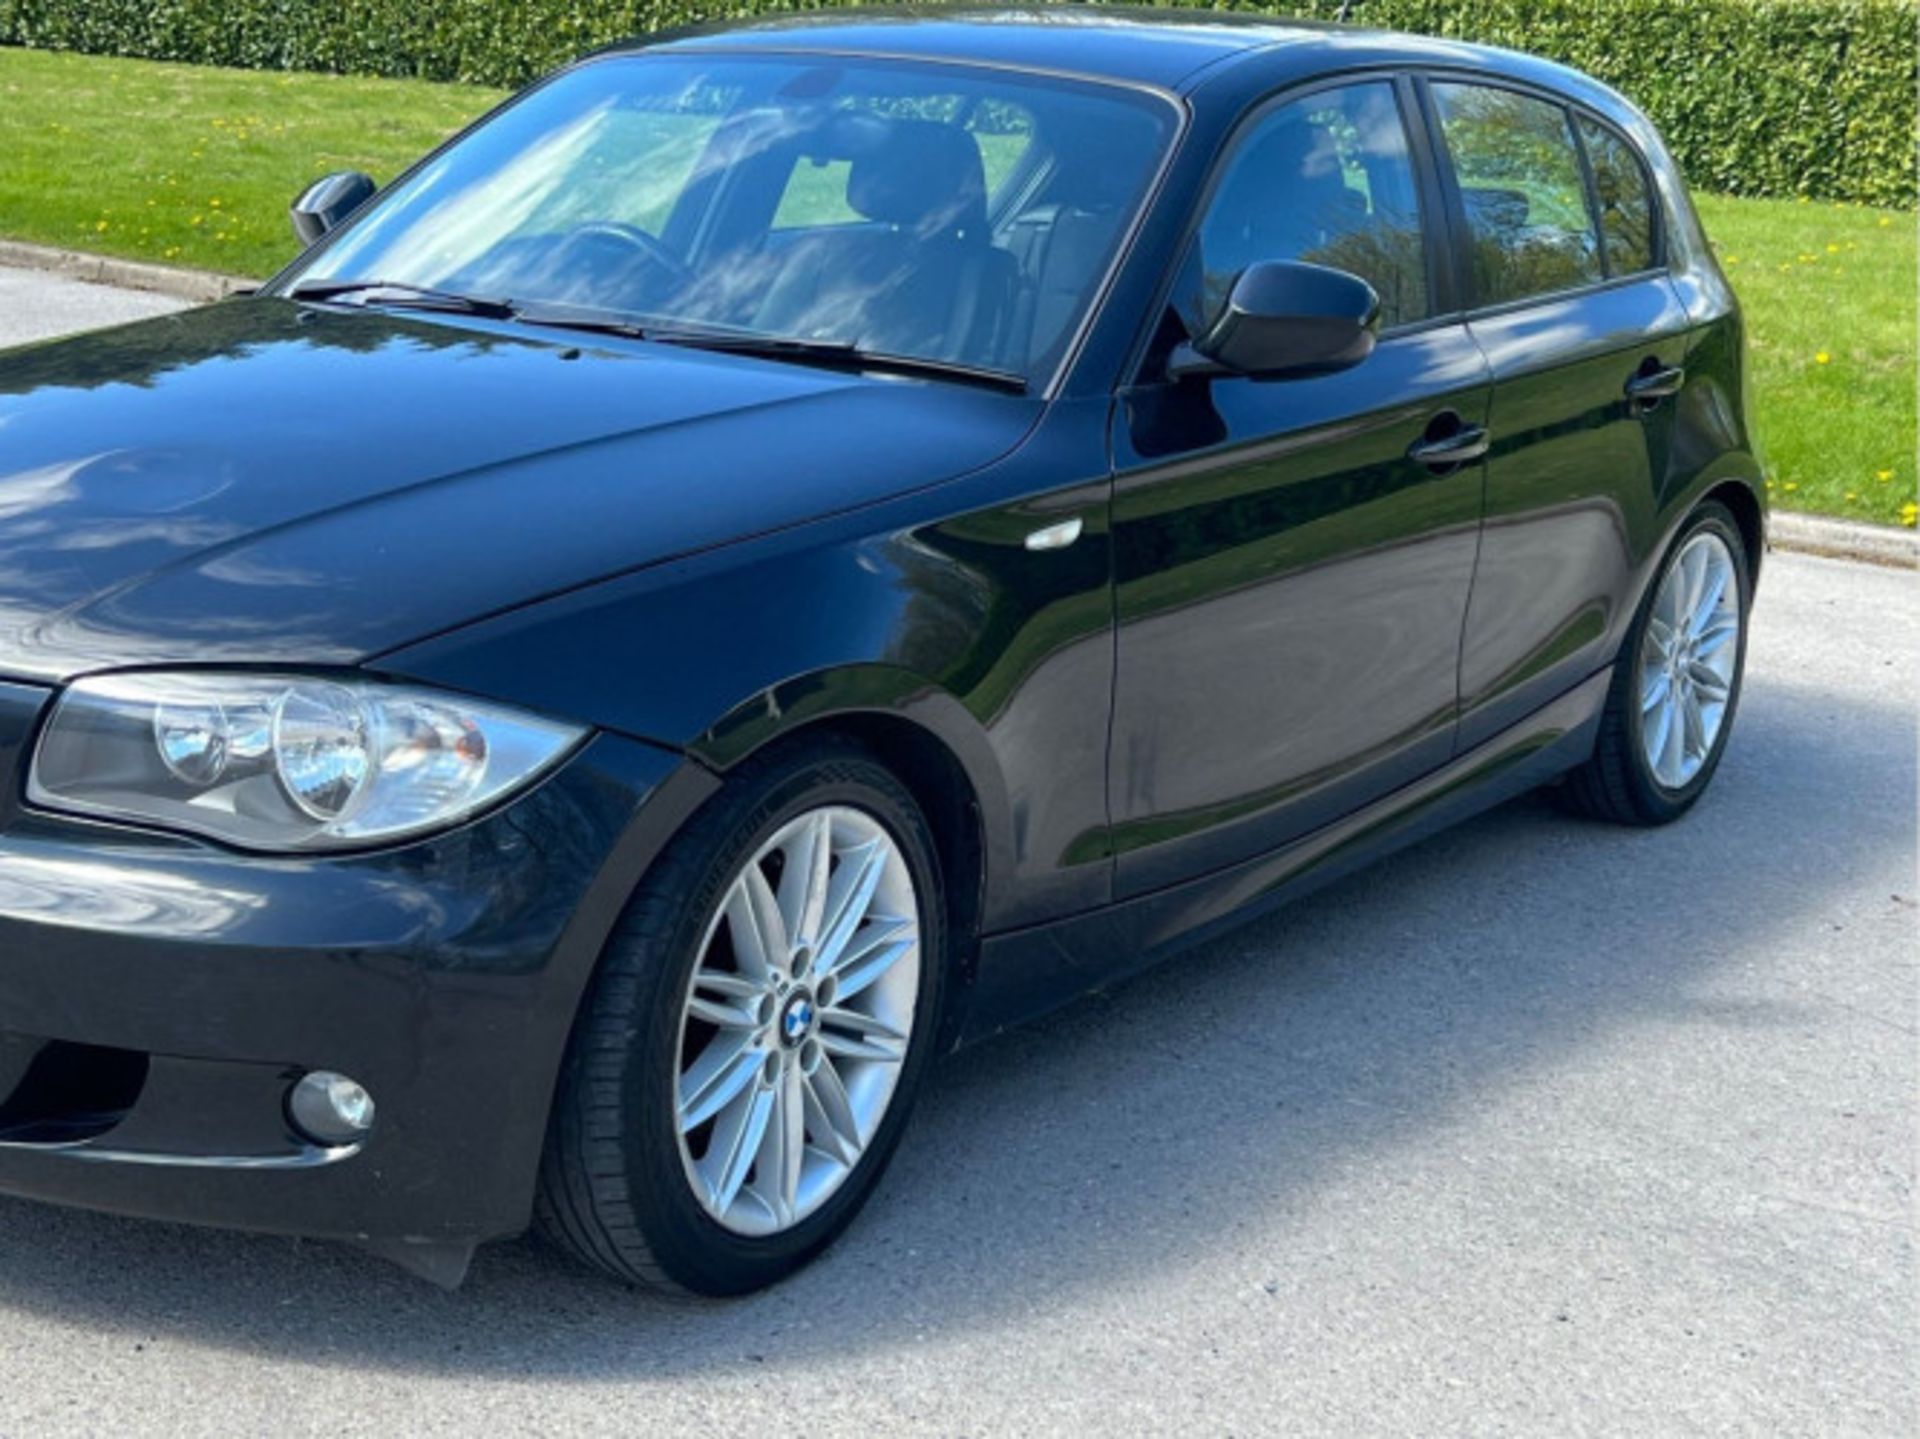 BMW 1 SERIES 2.0 118D M SPORT EURO 5 5DR (2010) - Image 17 of 58